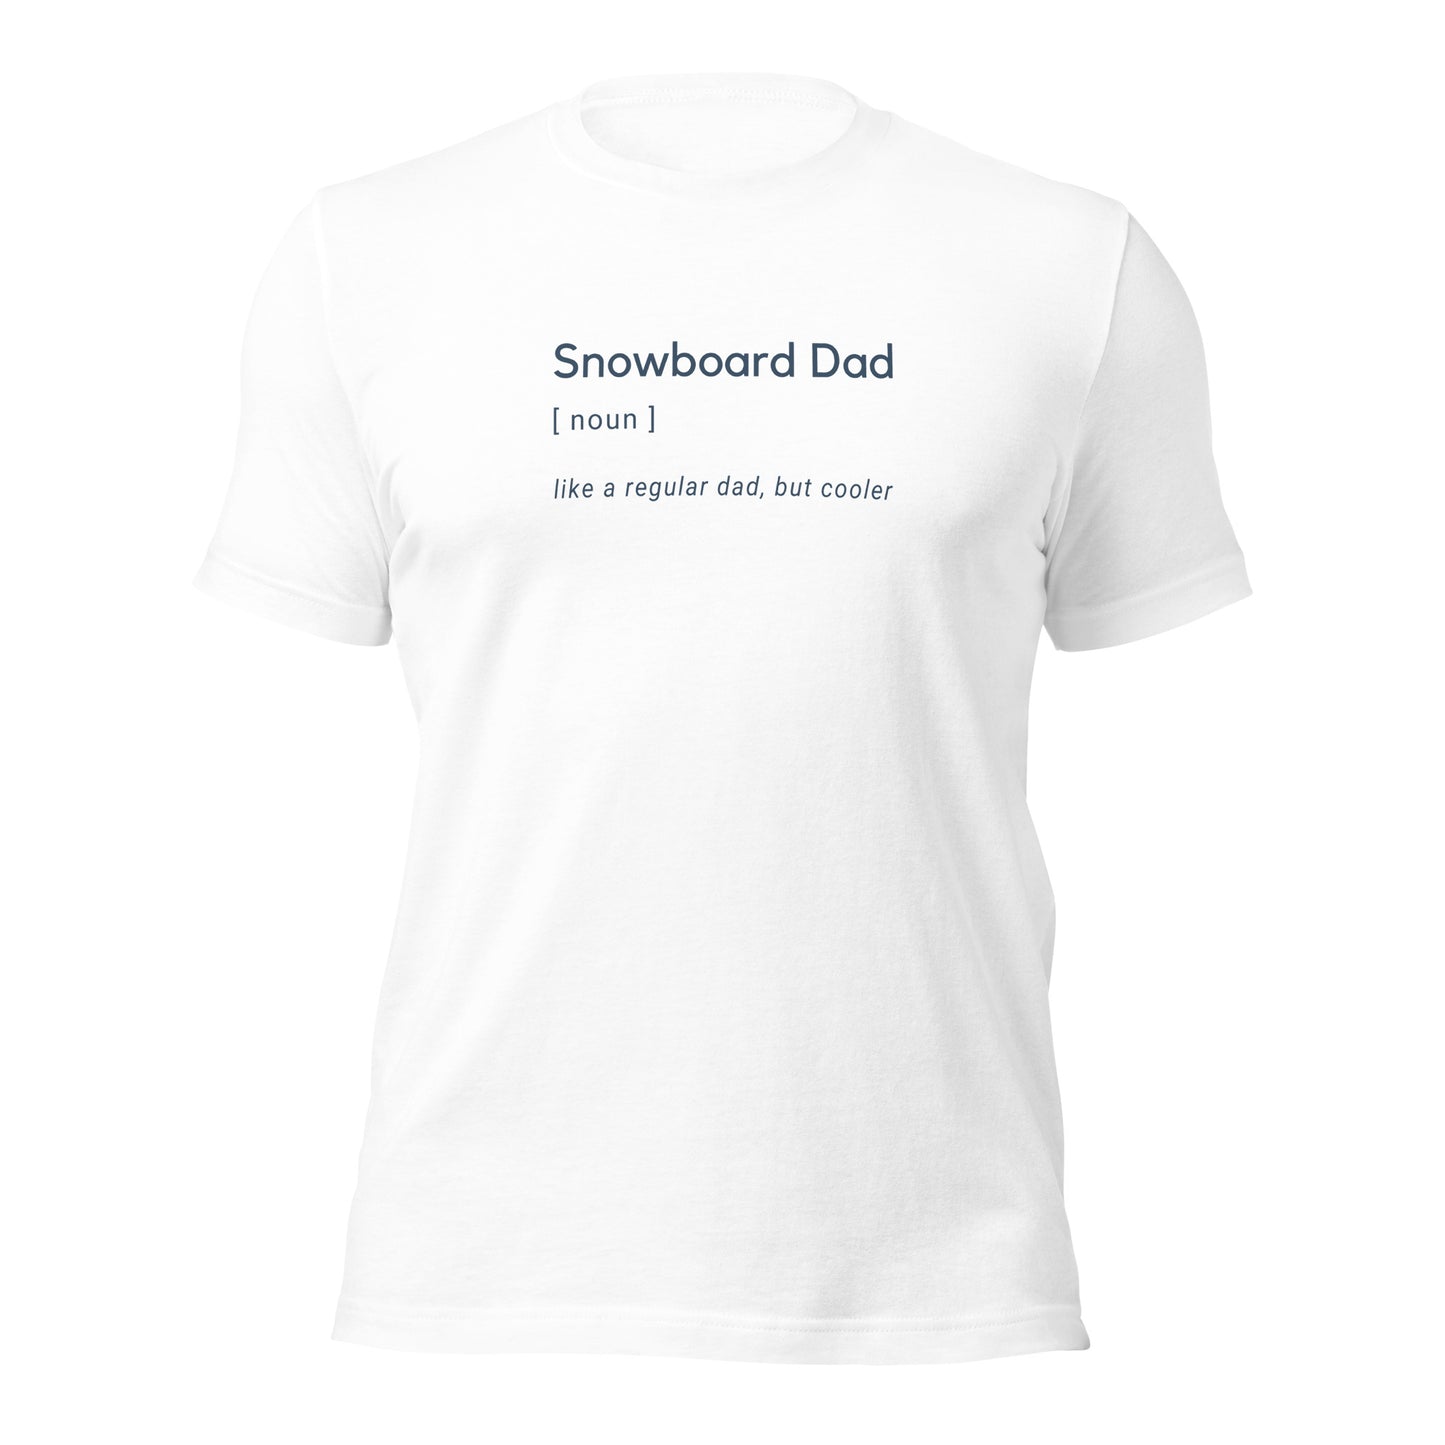 Snowboard Dad T-Shirt - Cool Vintage Snowboarding Tee for Dads